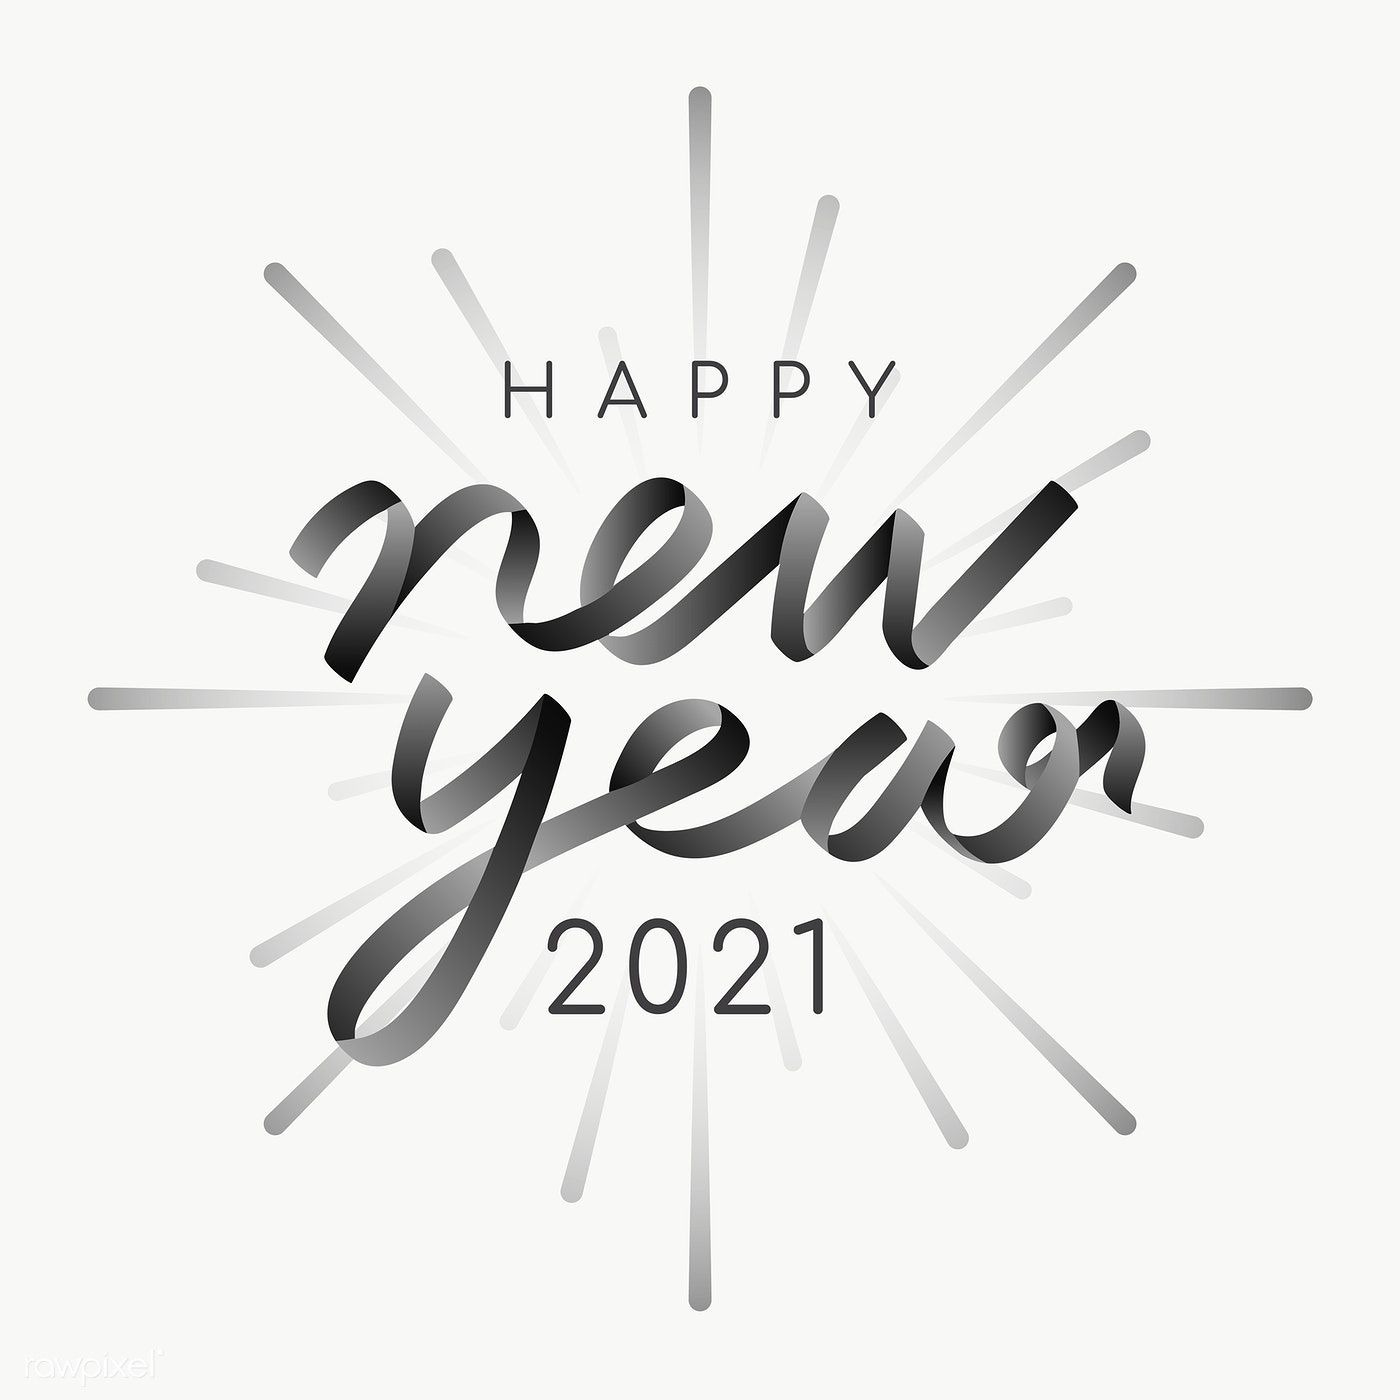 Happy New Year 2021 transparent png. free image / NingZk V. New year card design, Happy new year image, Happy new year